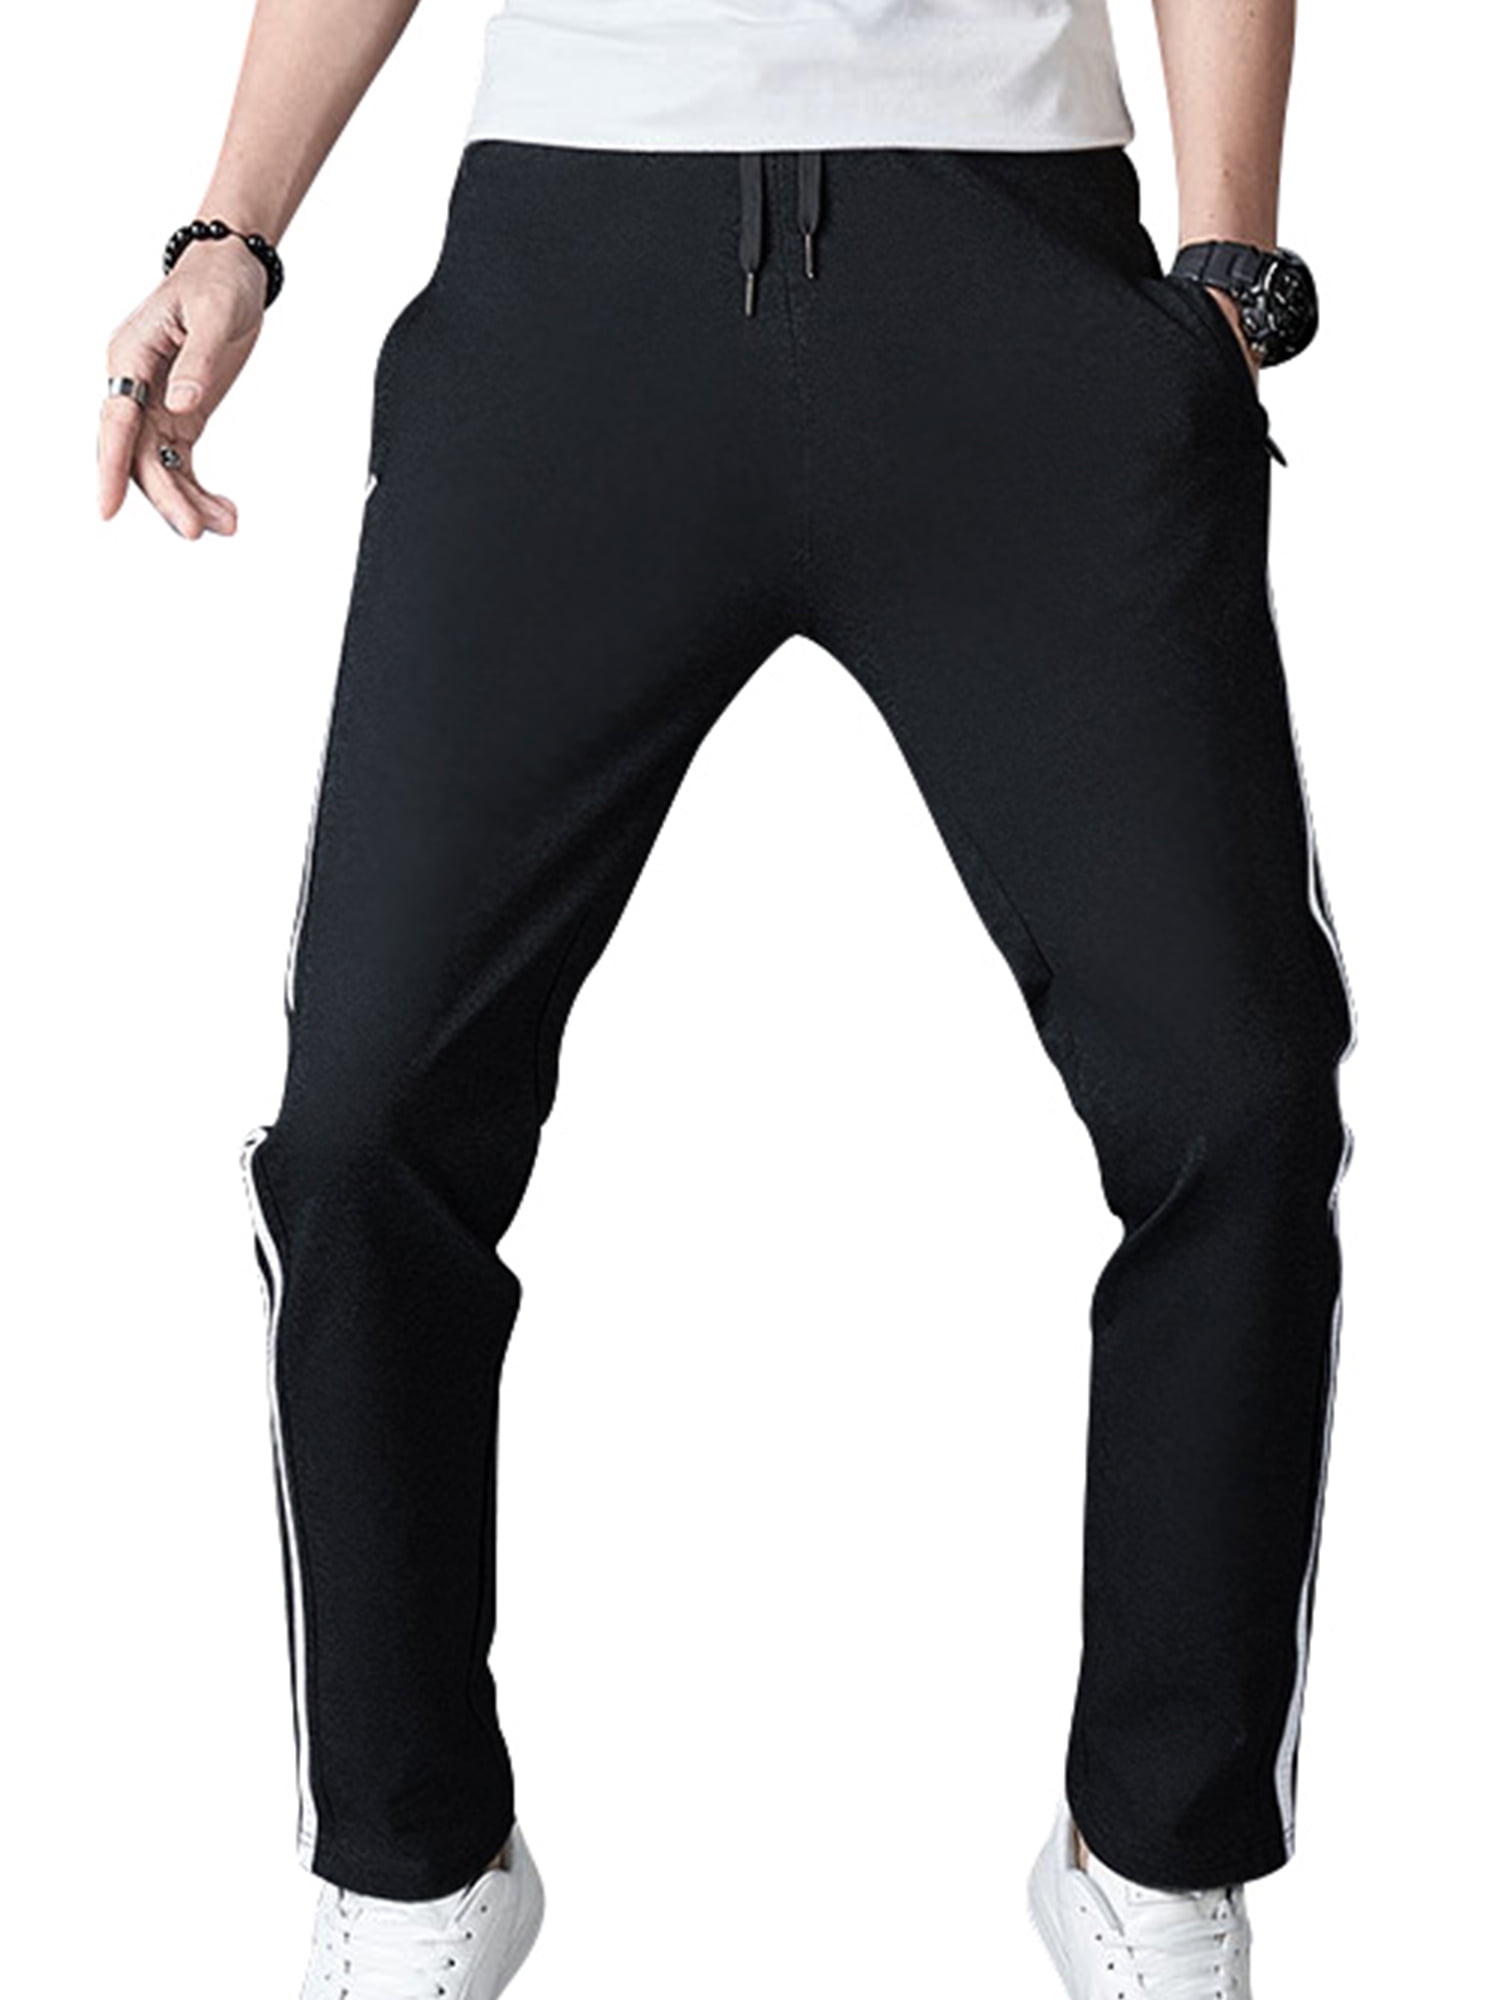 APTRO Mens Trousers Casual Tracksuit Bottoms Sweatpants Workwear Joggers Gym Sports Trousers